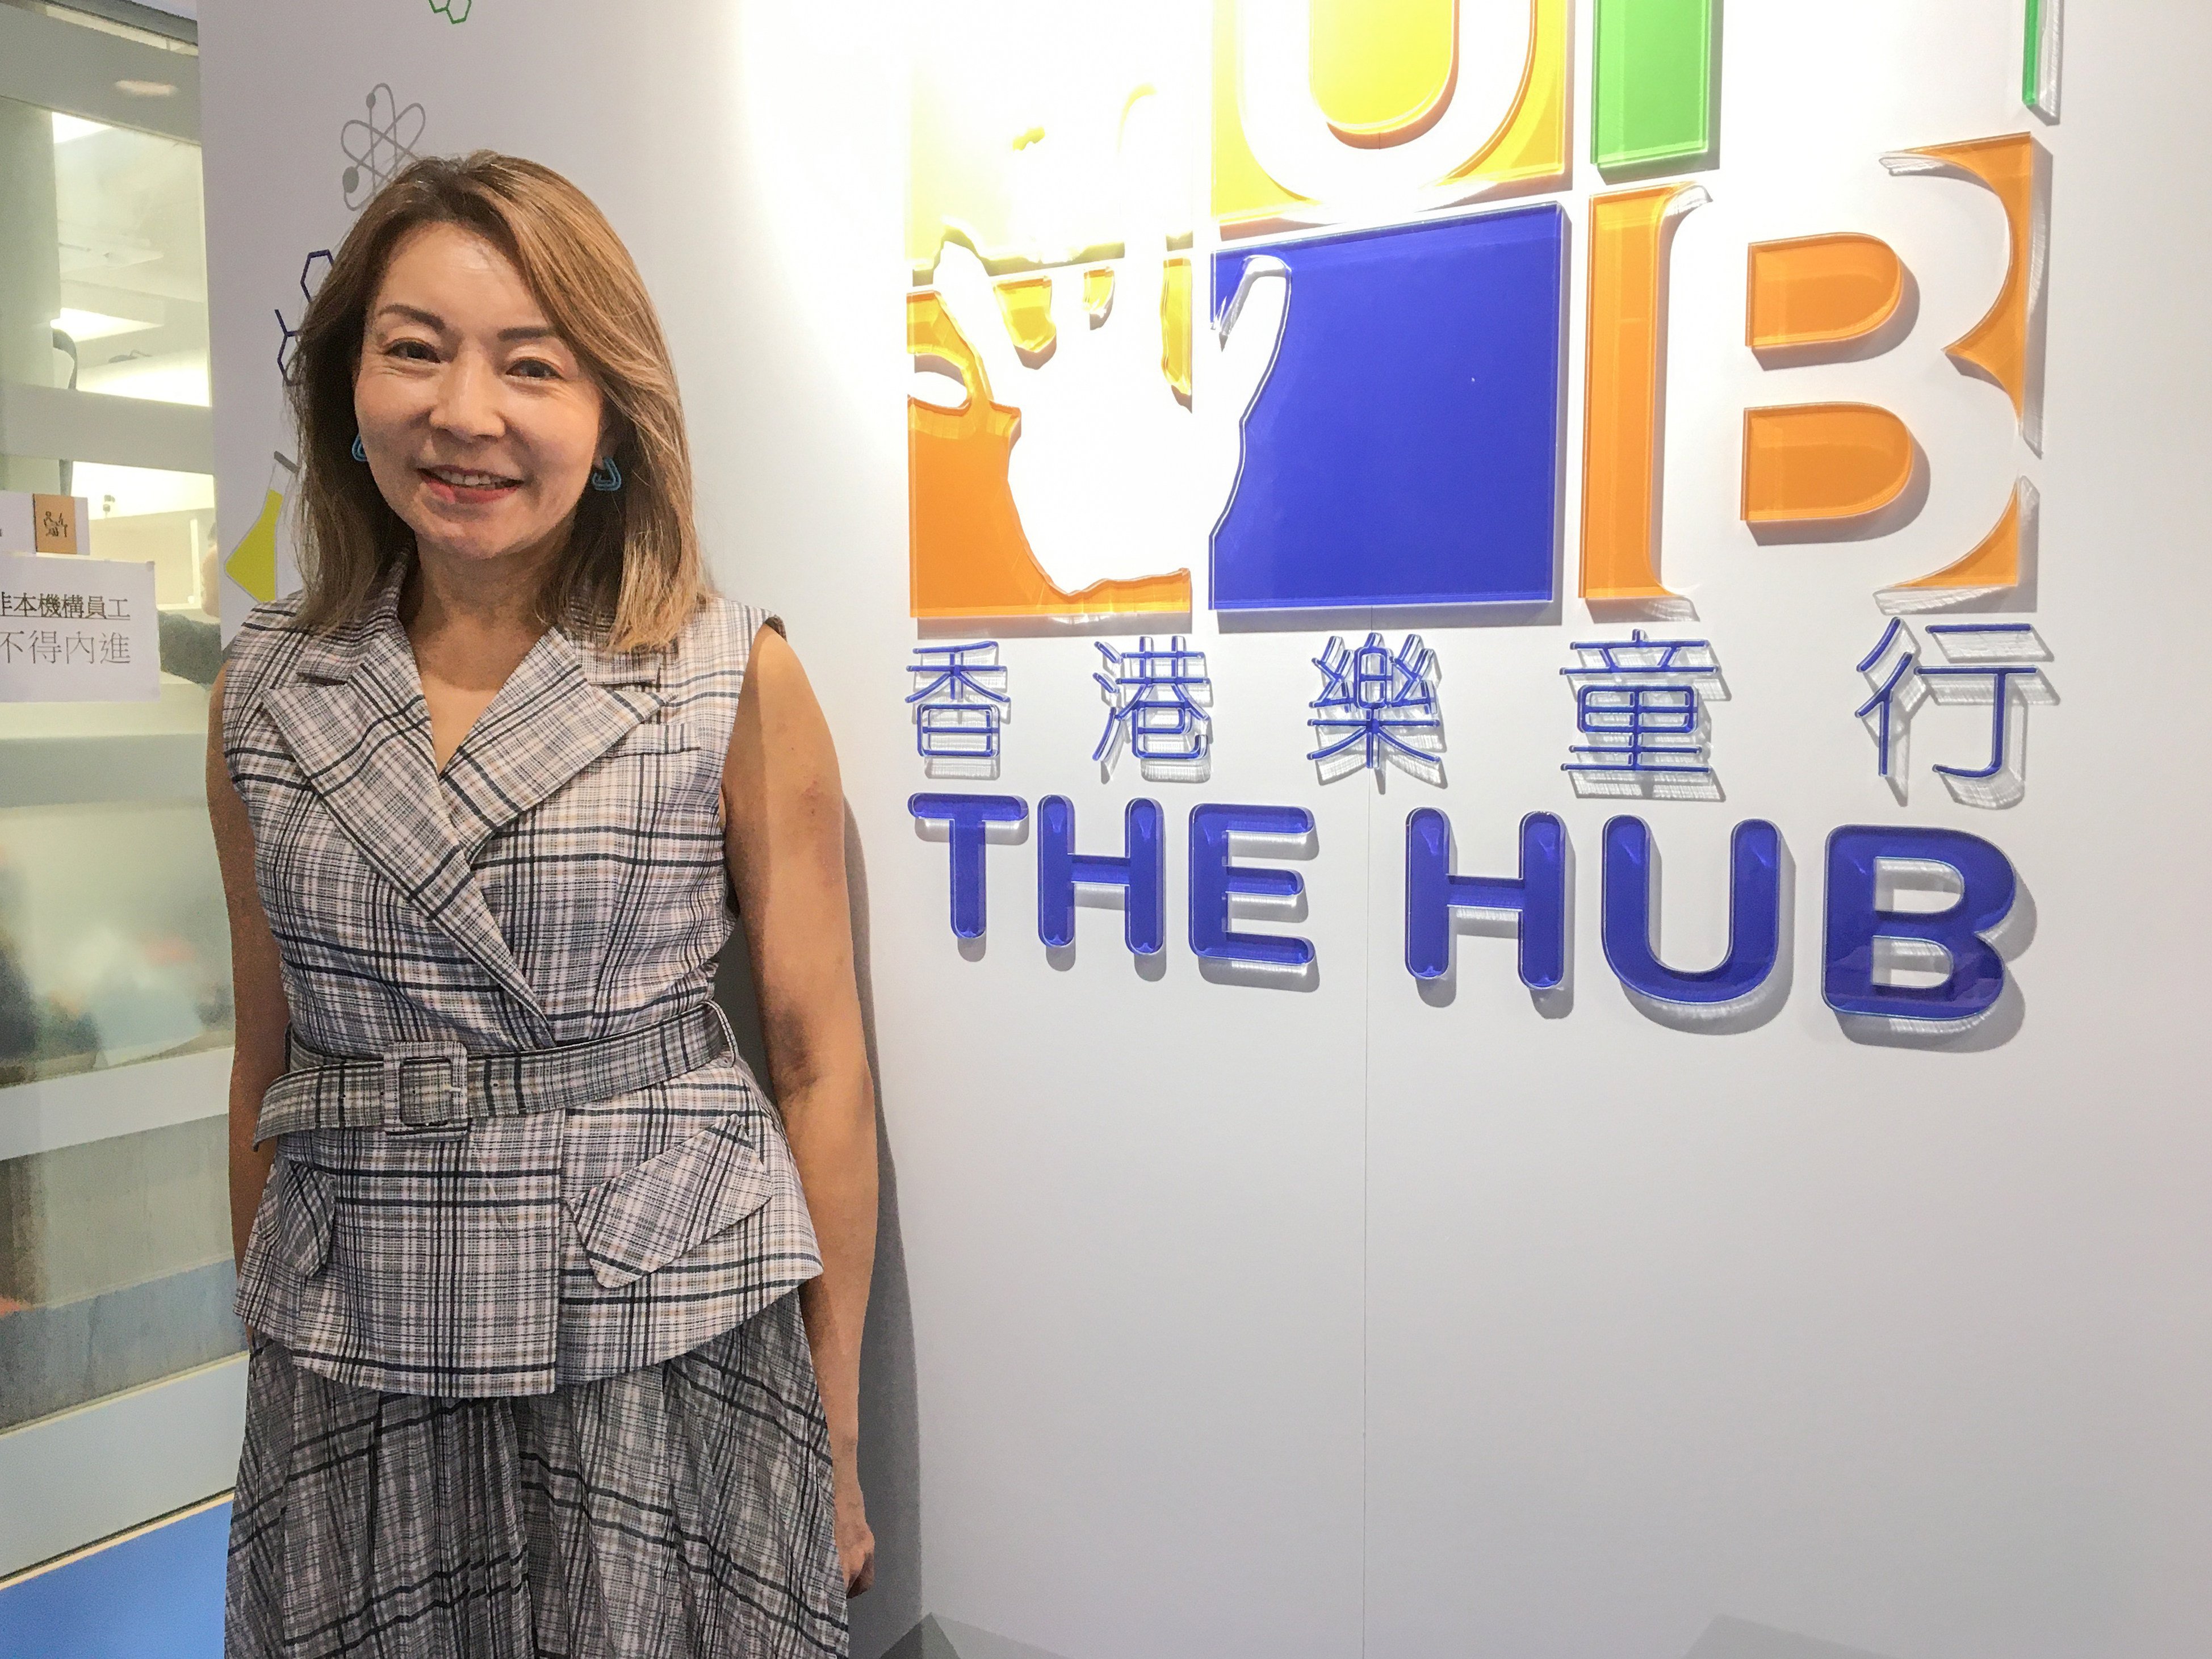 Josephine Leung, the charity’s executive director, says her team came up with the project after noticing rising levels of stress and anxiety among youngsters during the Covid-19 pandemic. Photo: Cindy Sui